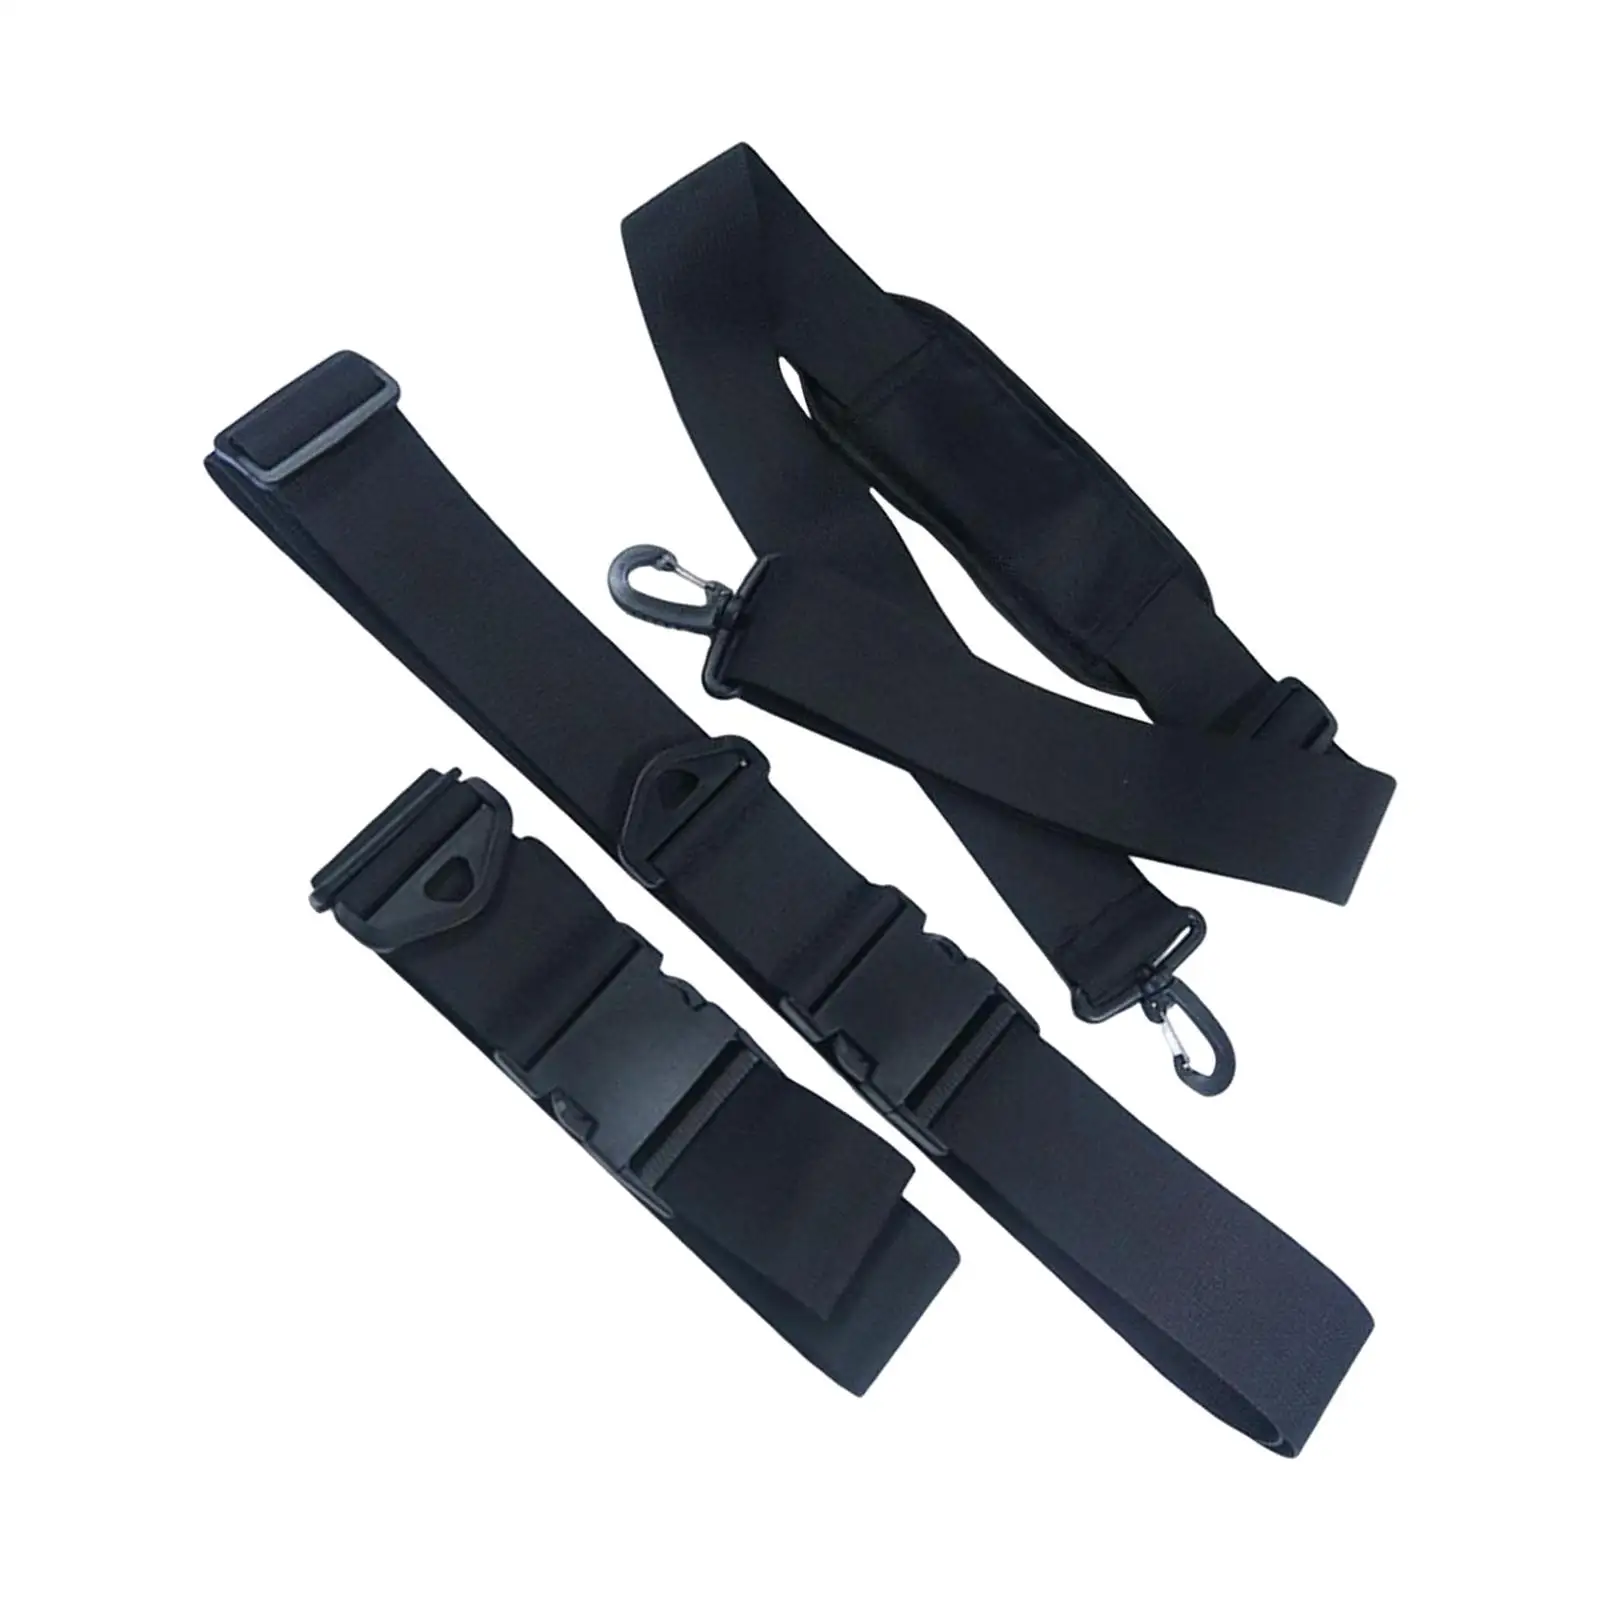 Paddle Board Shoulder Strap Carrier Paddle Board Accessories Portable Carrying Sling for Stand up Paddle Board Beach Longboard